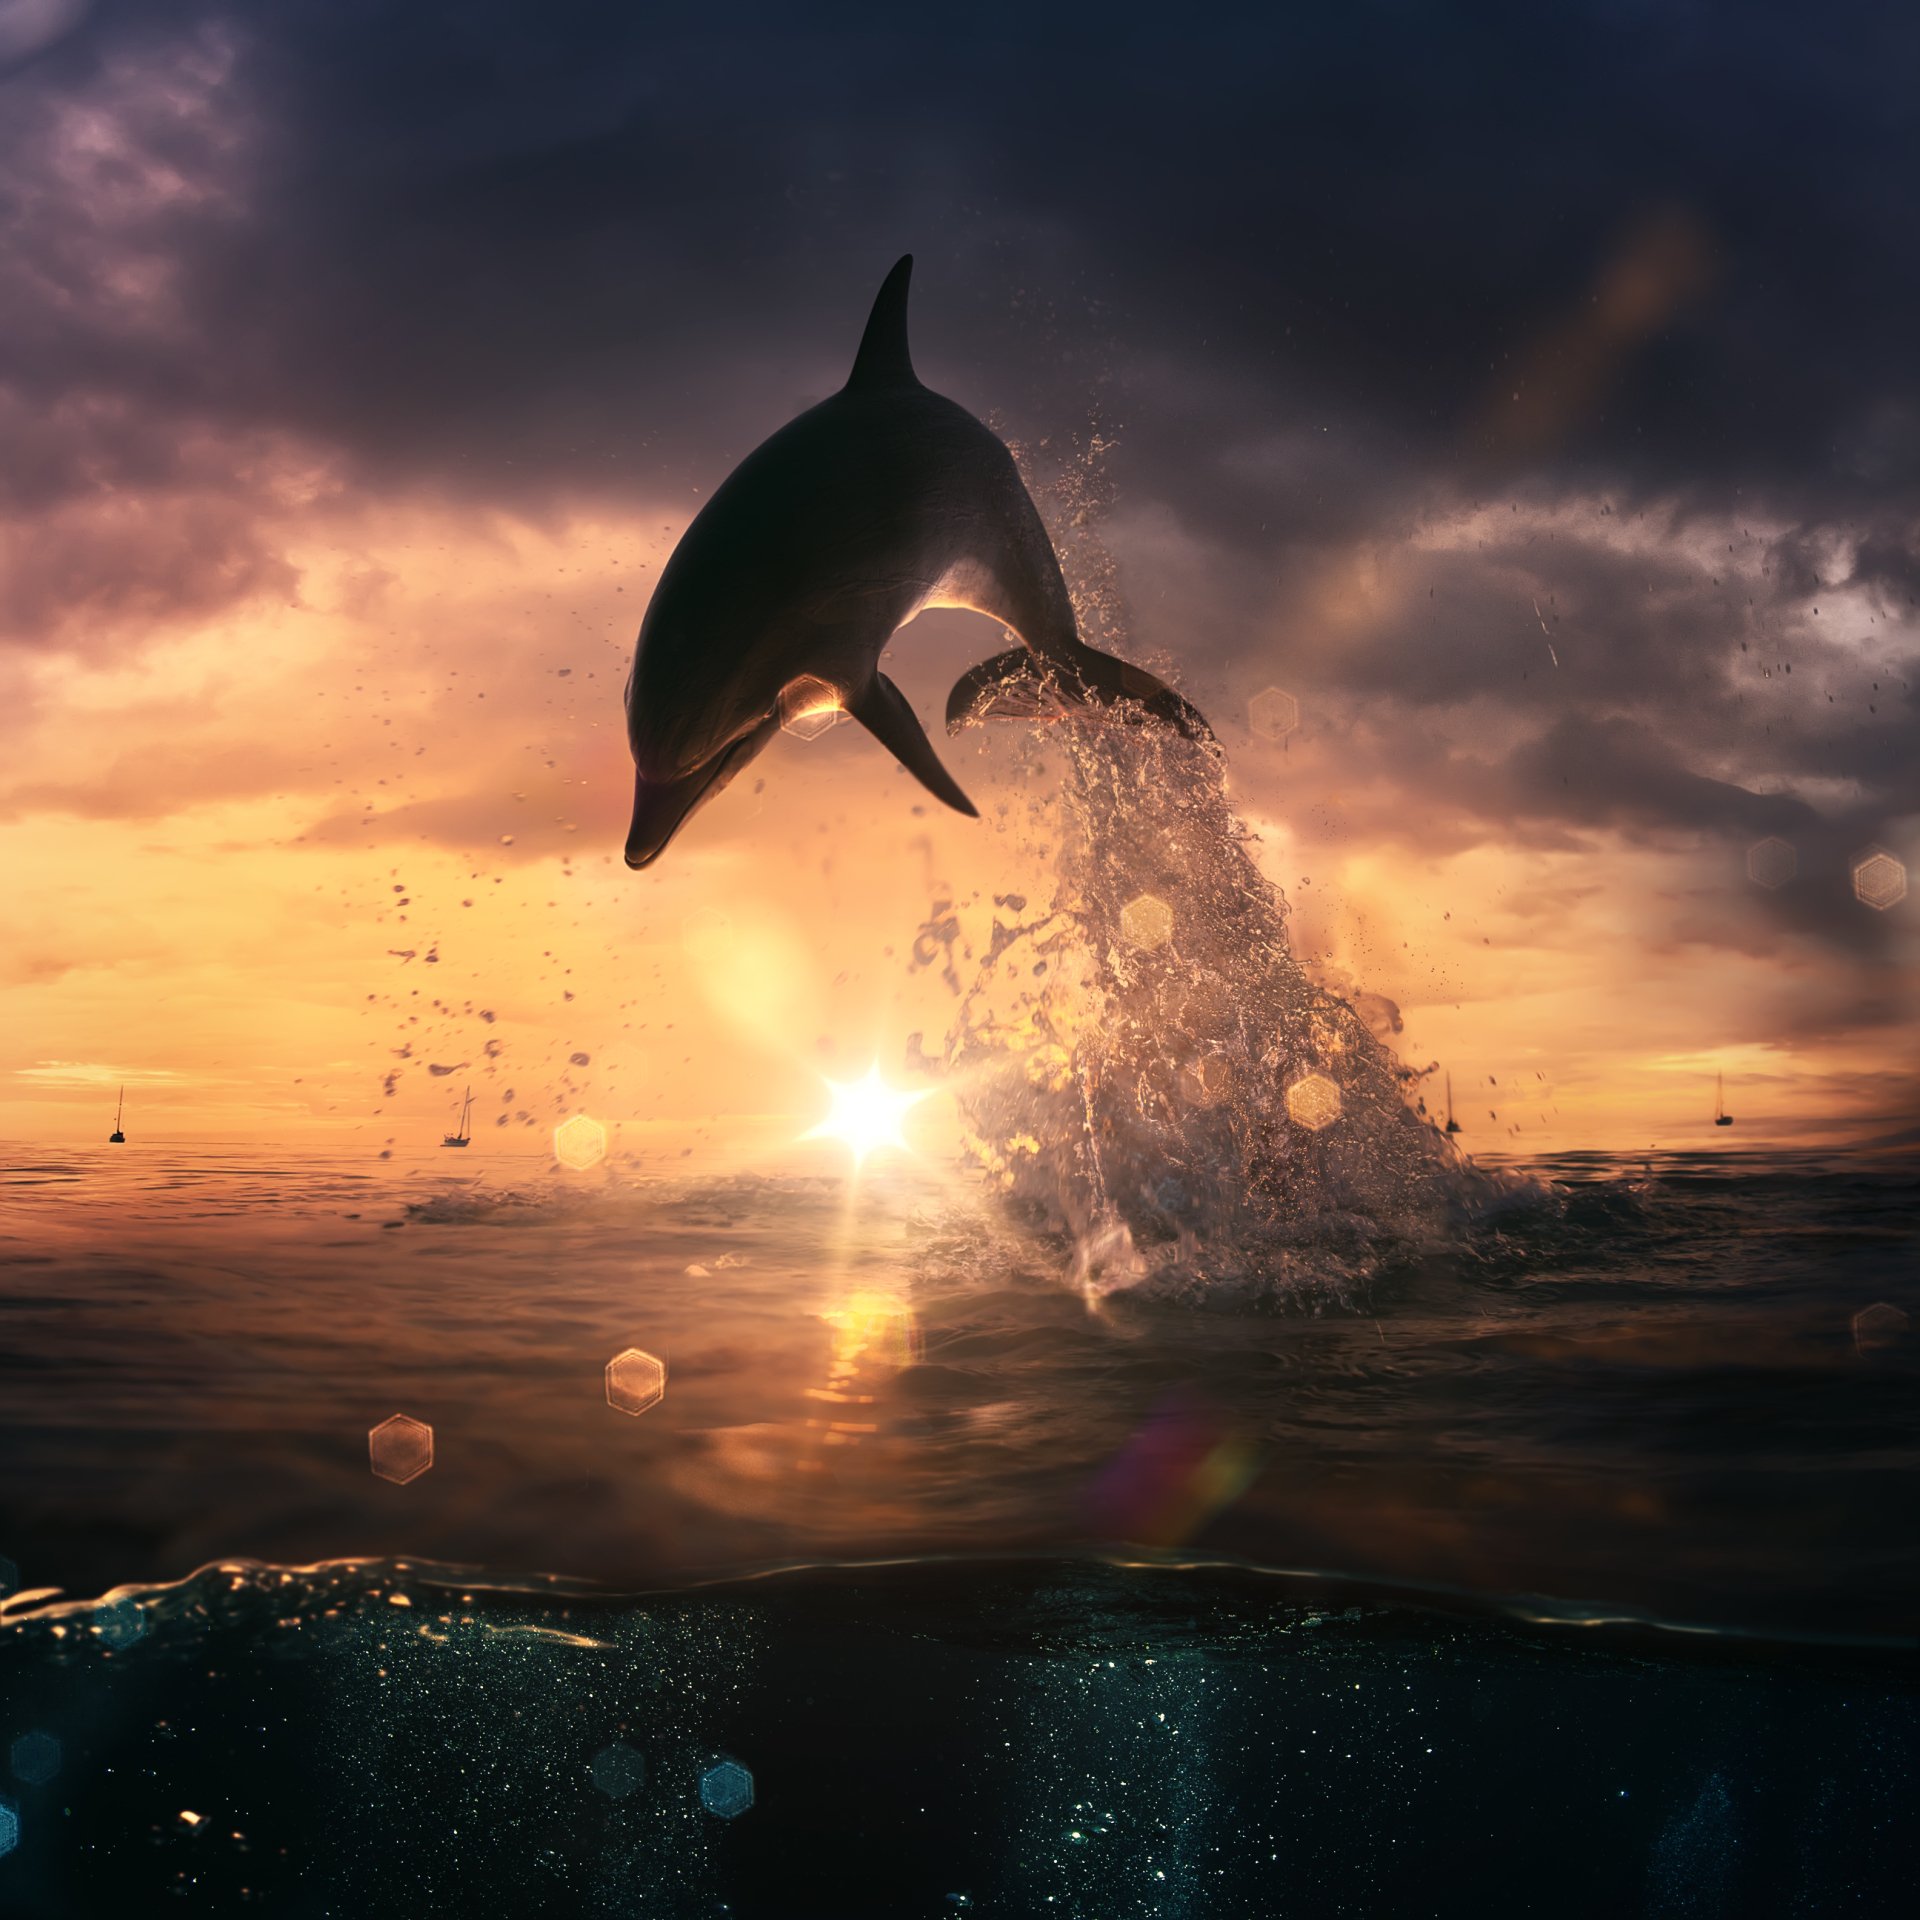 Dolphin at sunset jumping out of the water Image ID